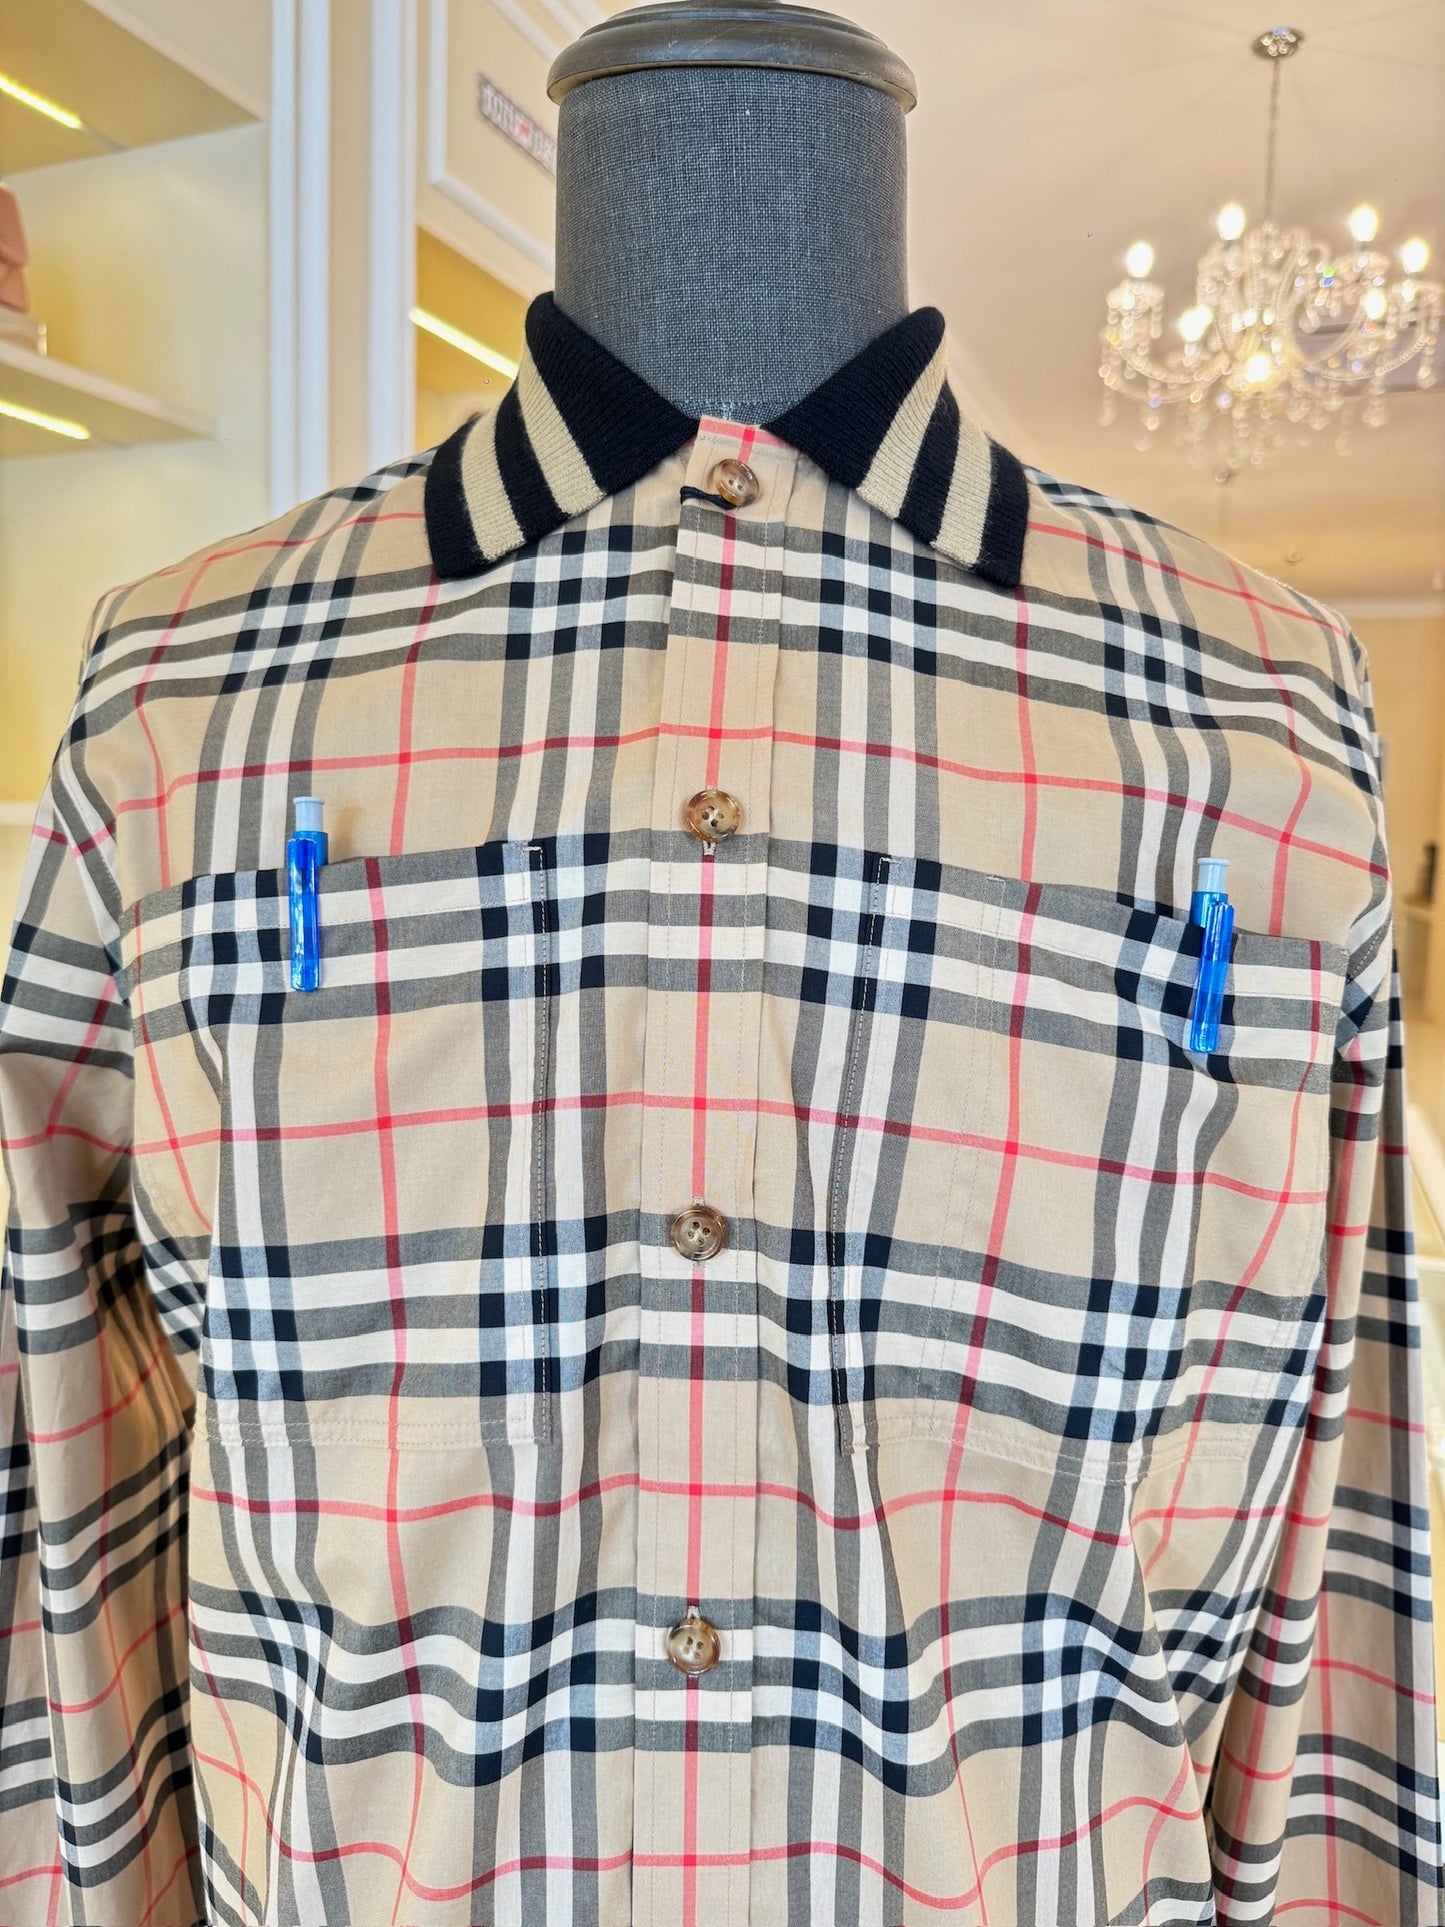 Burberry Men's Long Sleeve Checkered Shirt with Knit Collar